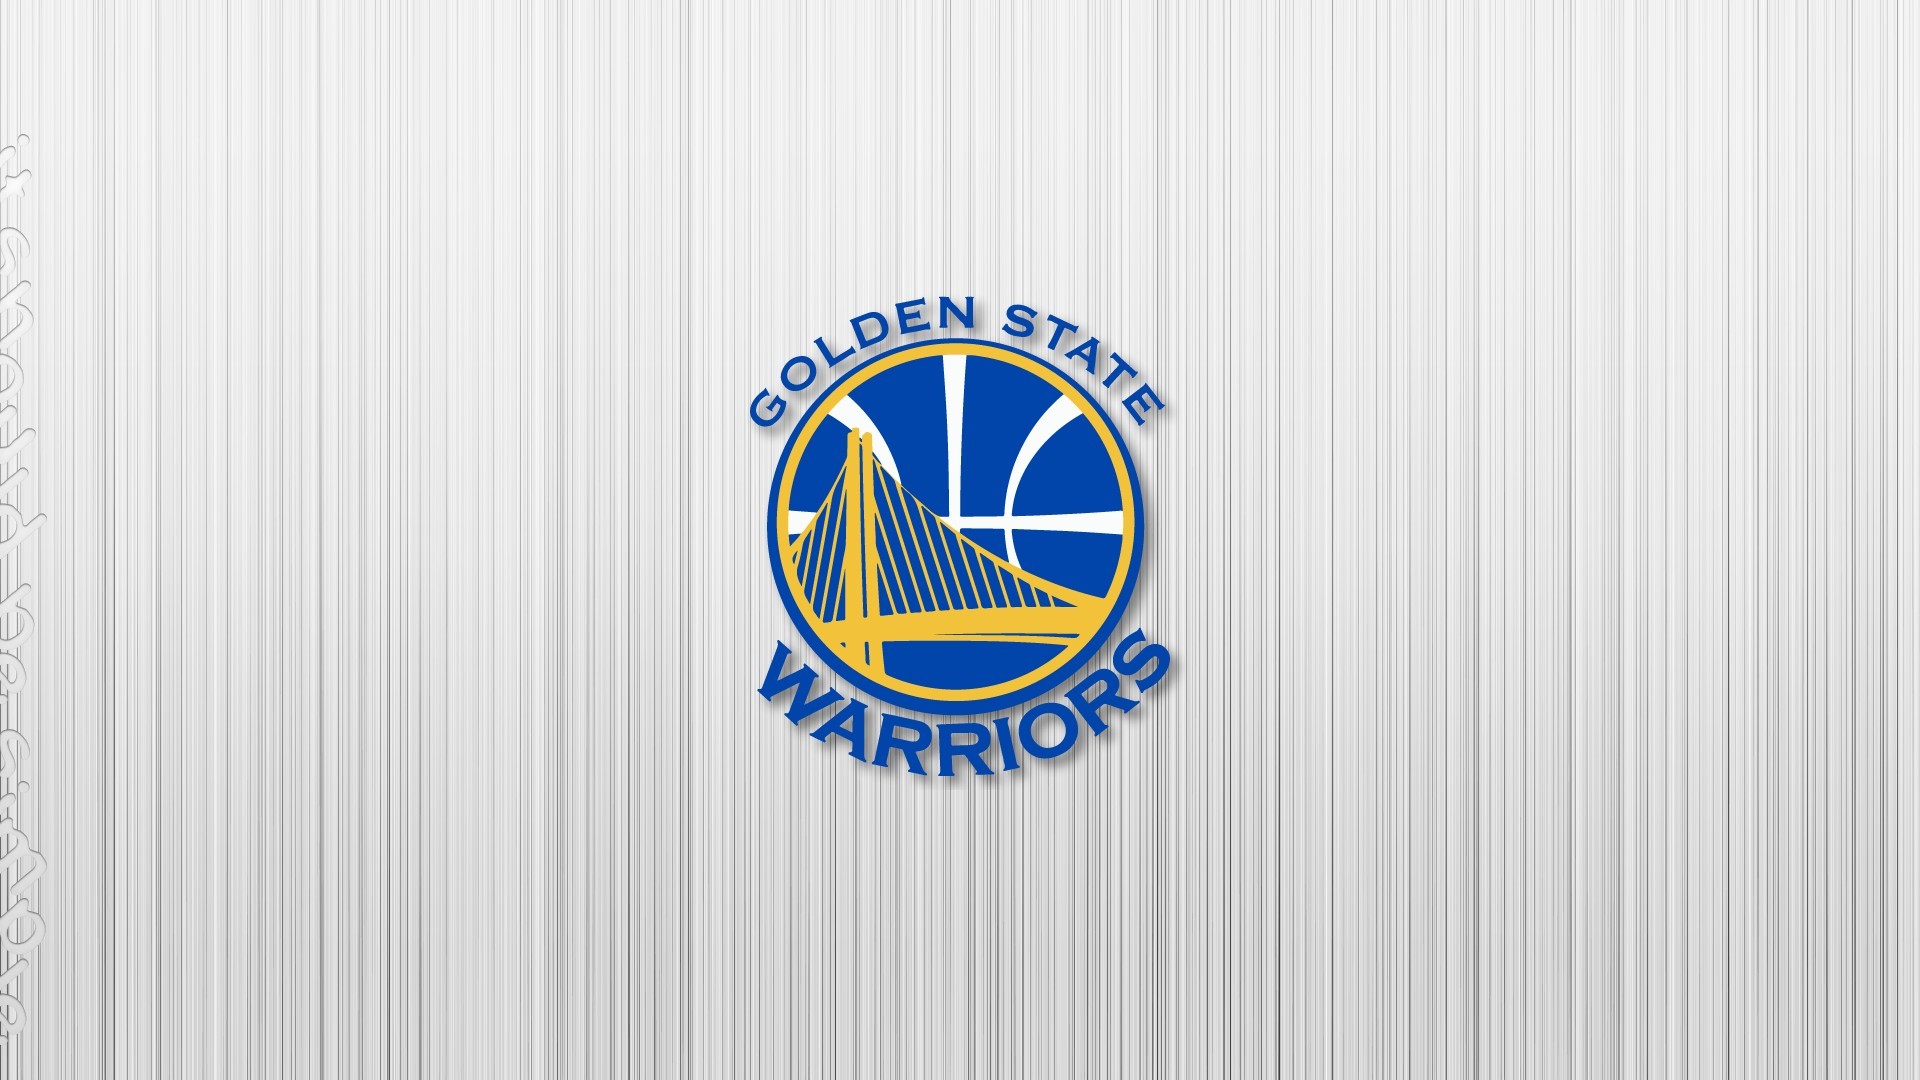 1920x1080 Golden State Warriors NBA HD Wallpapers with image dimensions   pixel. You can make this